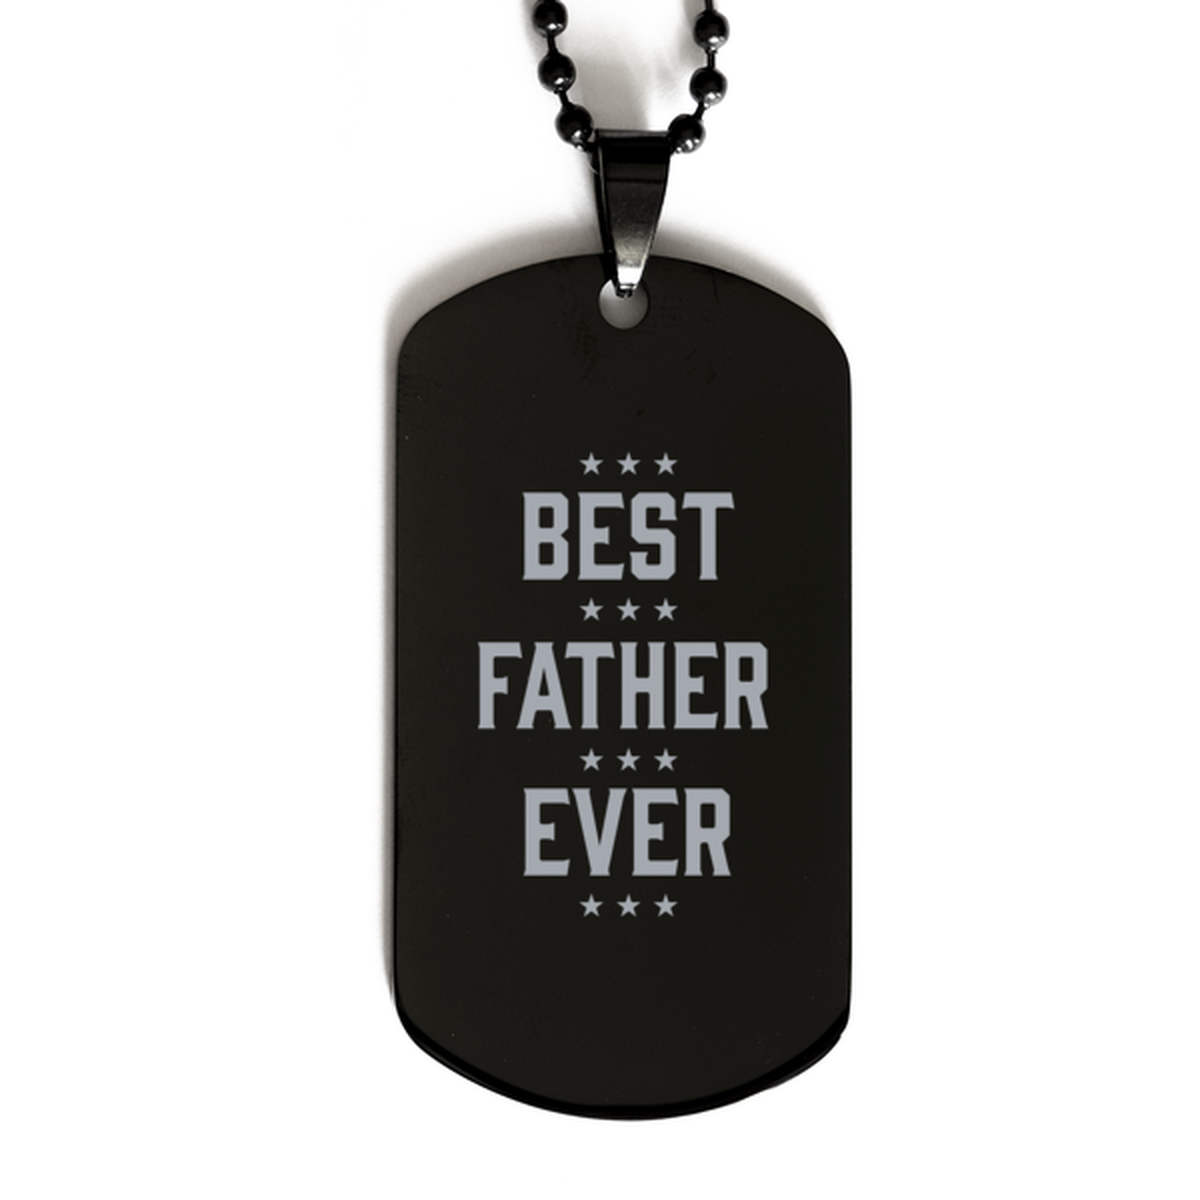 Best Father Ever Father Gifts, Funny Black Dog Tag For Father, Birthday Family Presents Engraved Necklace For Men